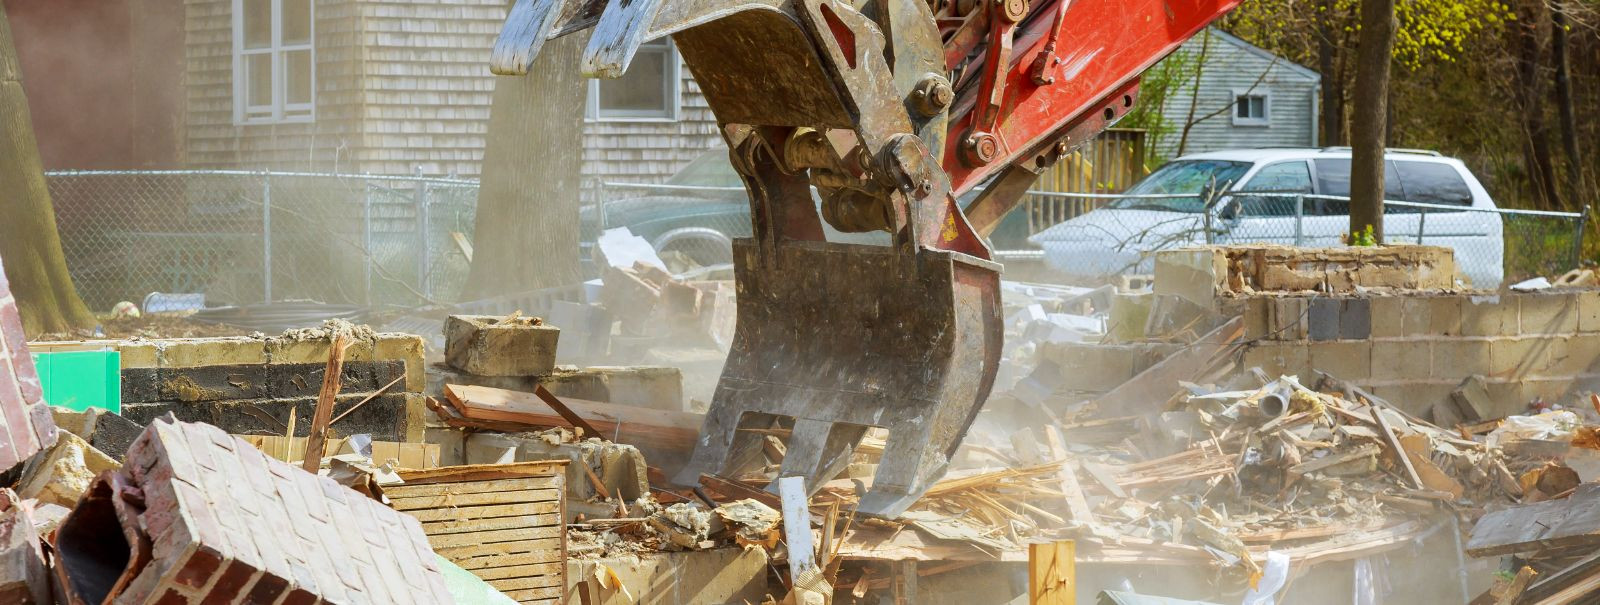 Demolition is a critical step in the process of redevelopment and renovation. It involves the dismantling of buildings and structures, clearing the way for new 